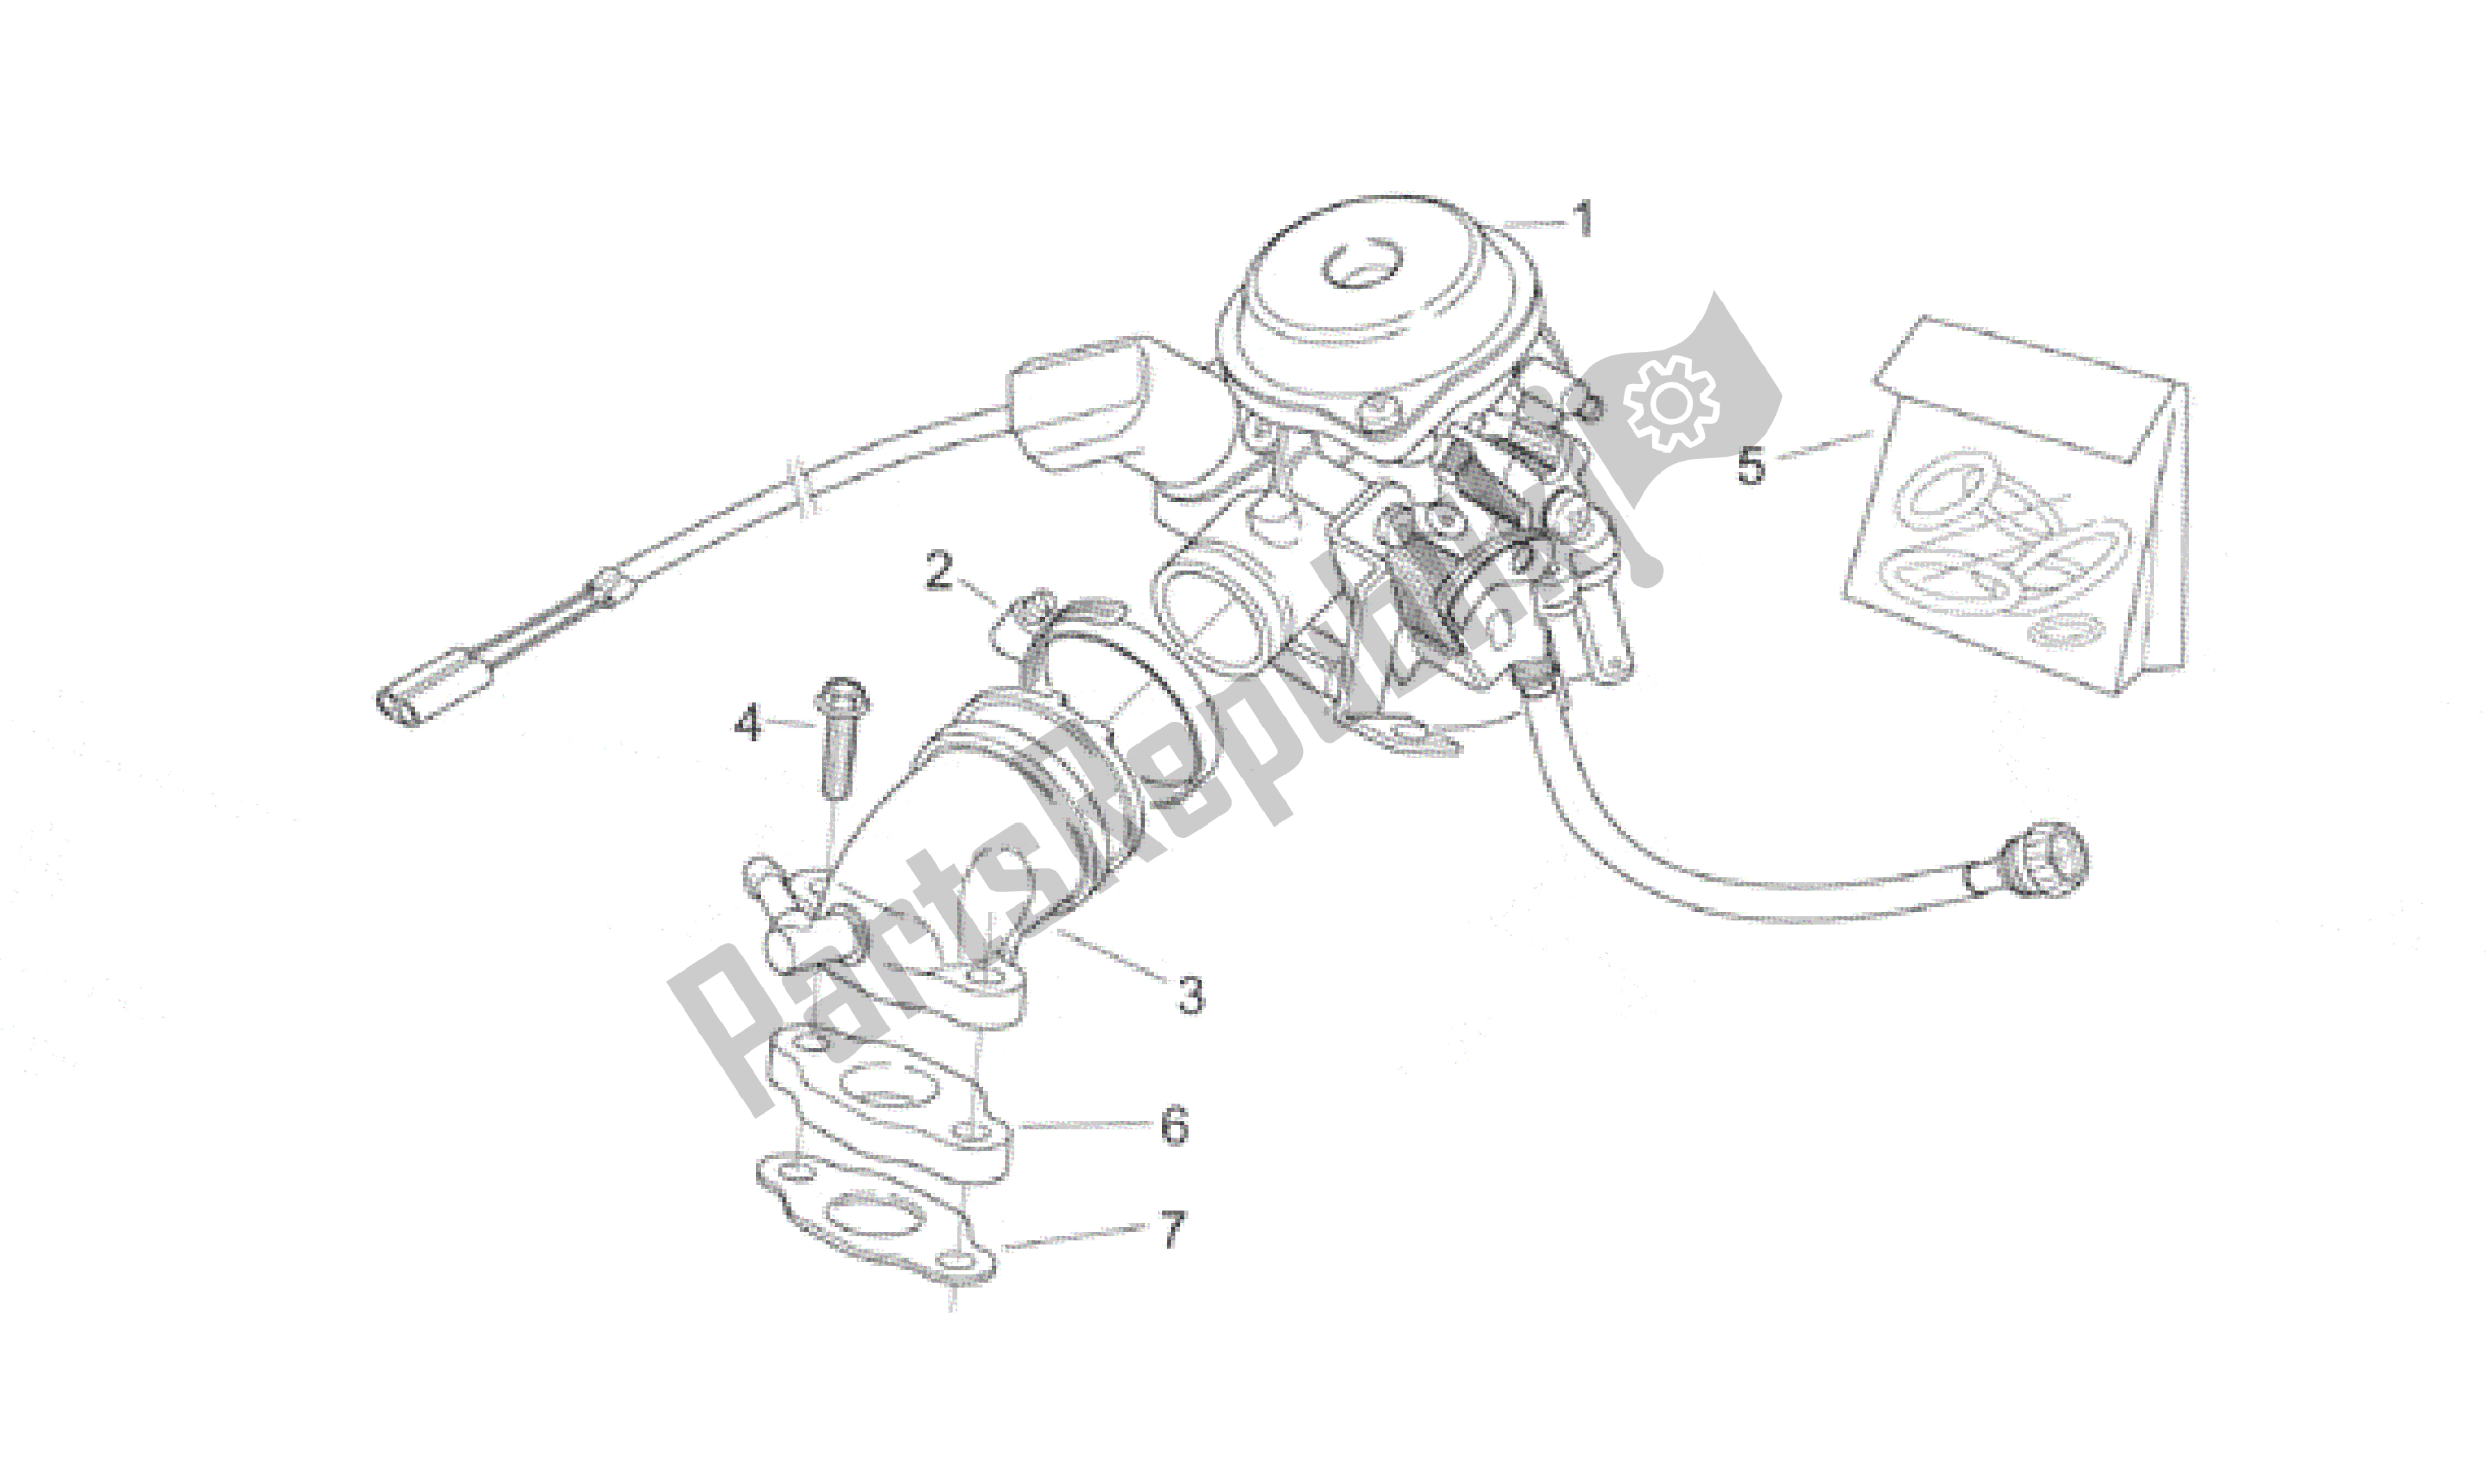 All parts for the Carburettor of the Aprilia Habana 125 1999 - 2001